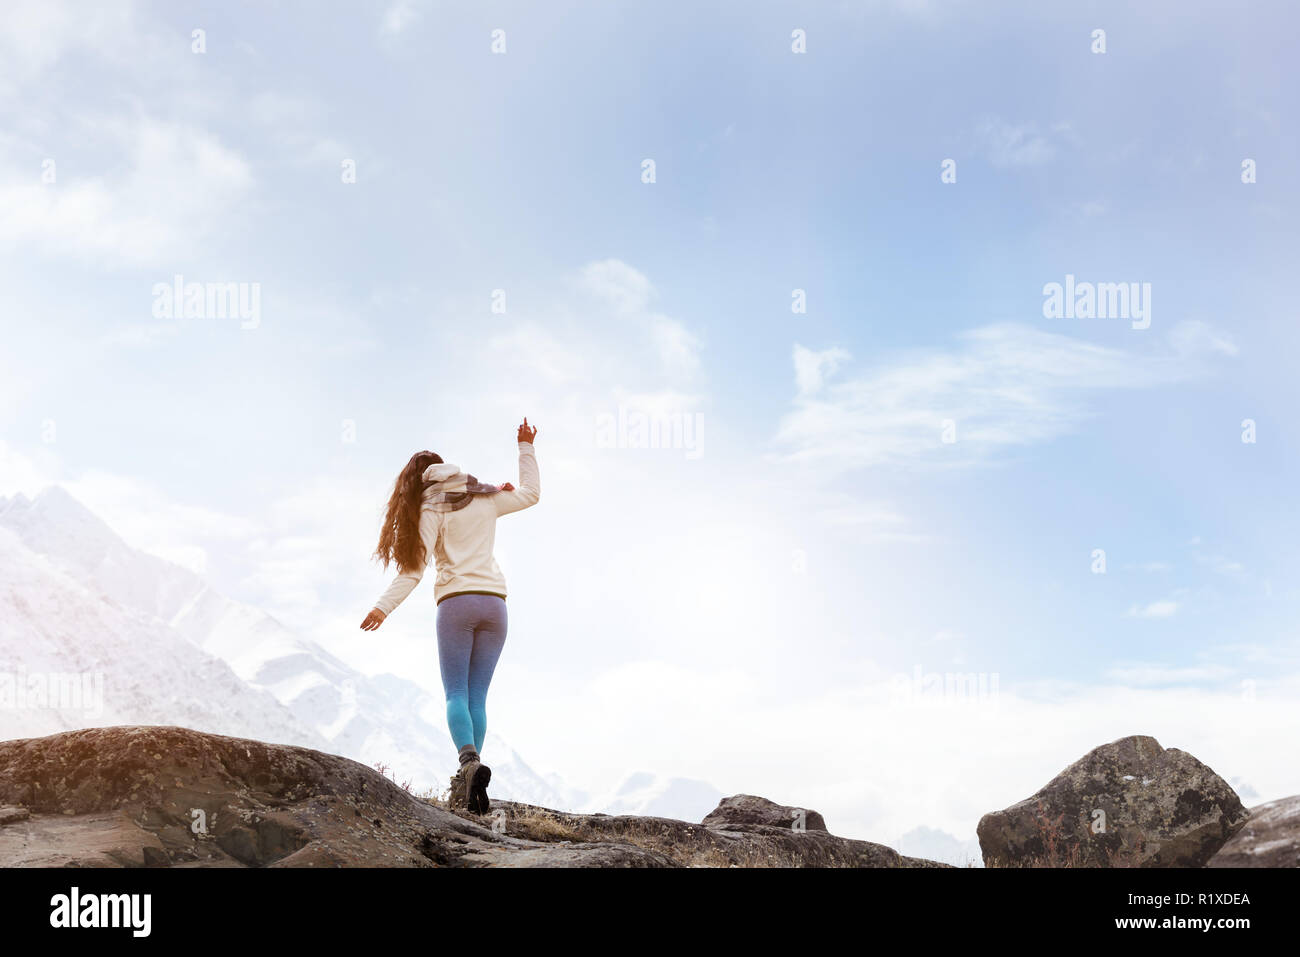 Lady is walking by big rock on background of snow capped mountains Stock Photo